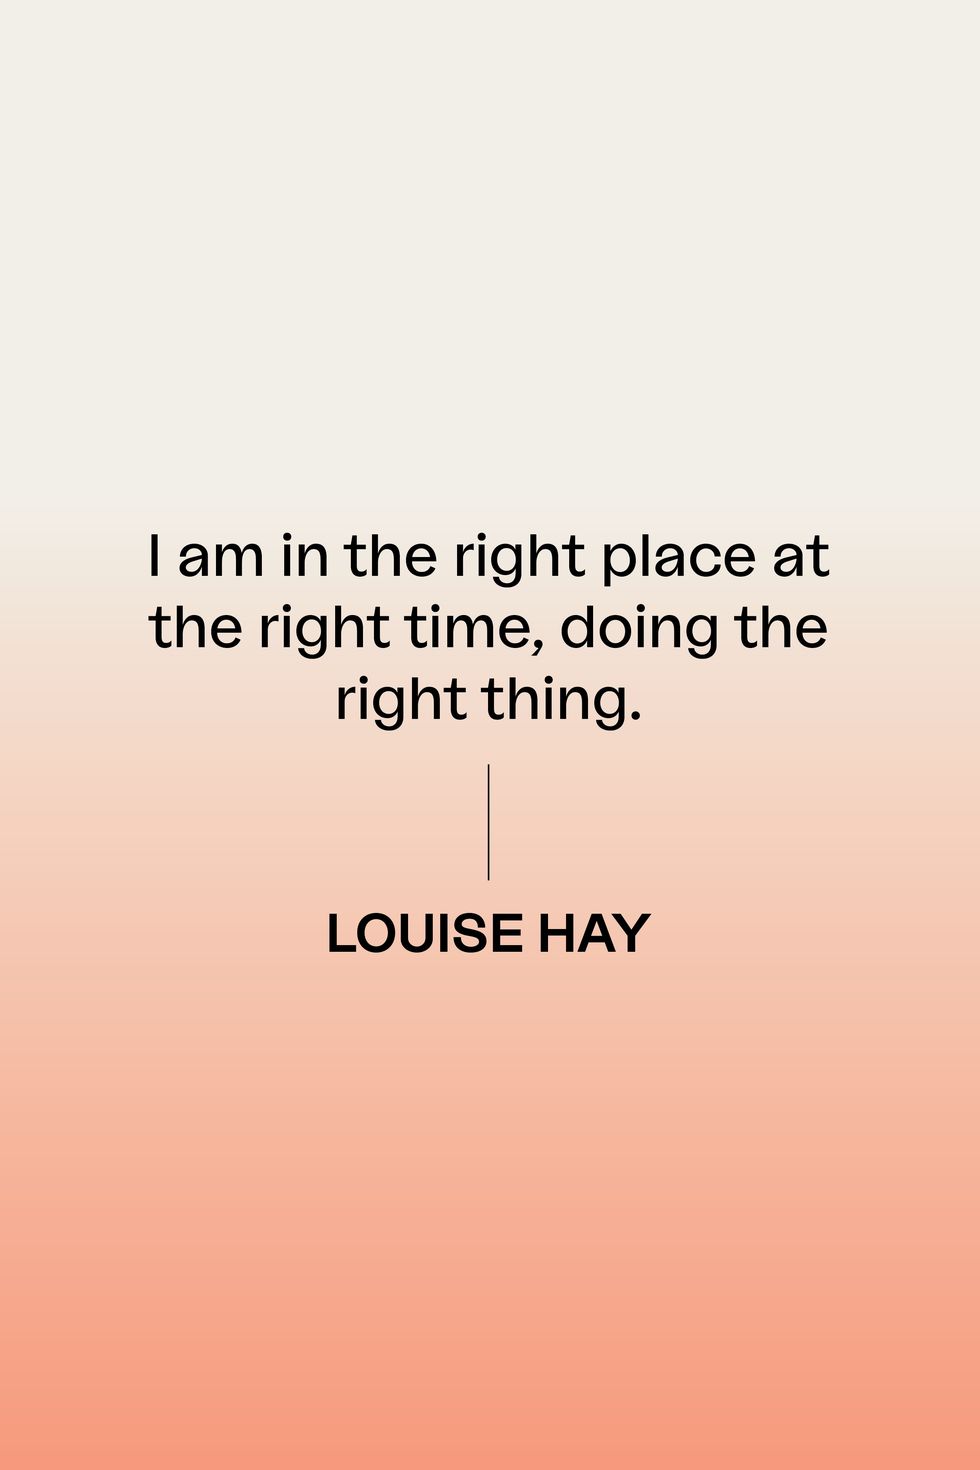 Affirmations By Louise Hay (@louise_hay_affirmations) • Instagram